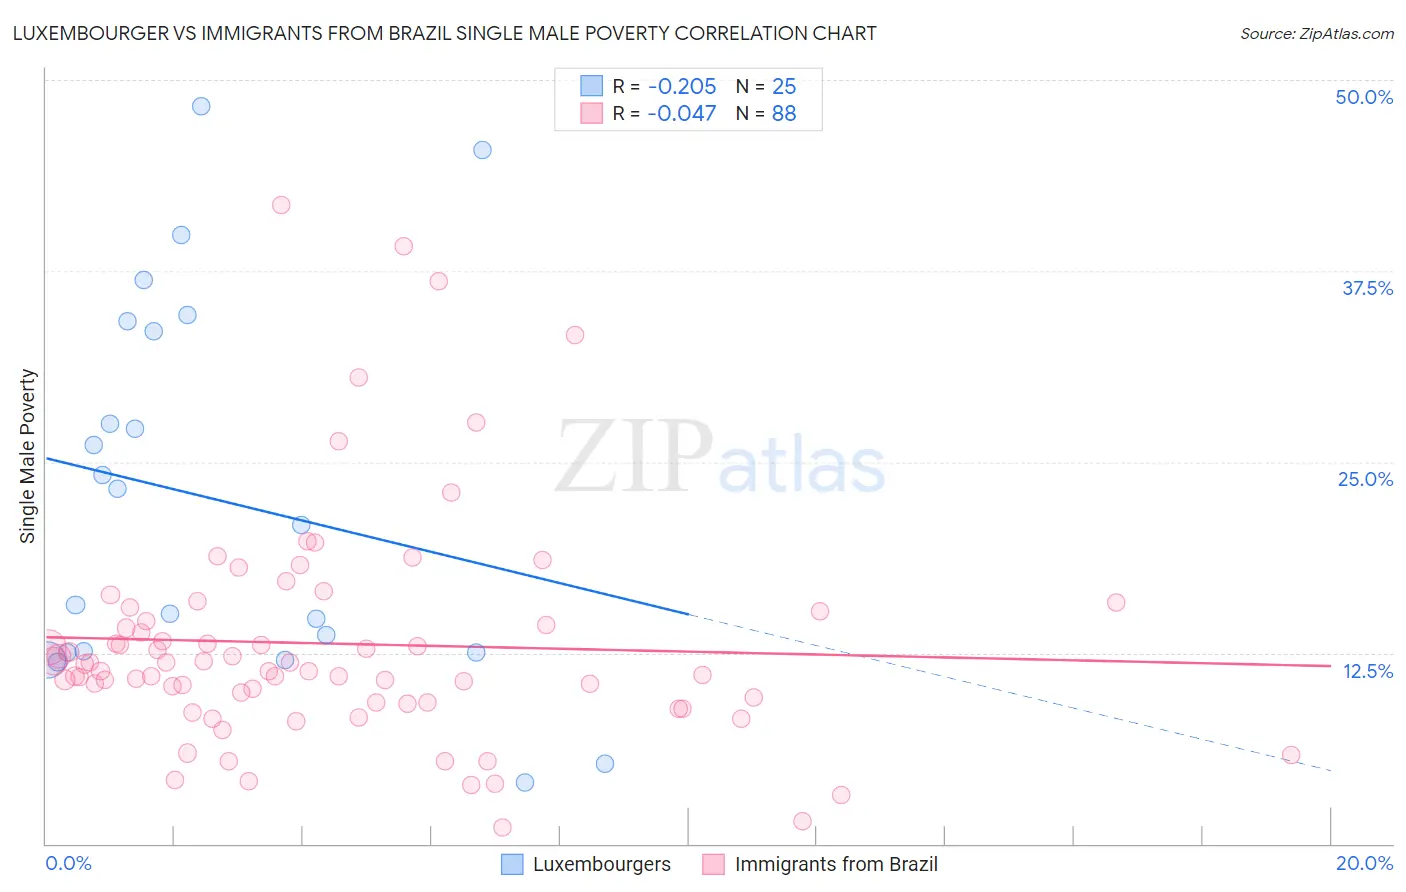 Luxembourger vs Immigrants from Brazil Single Male Poverty